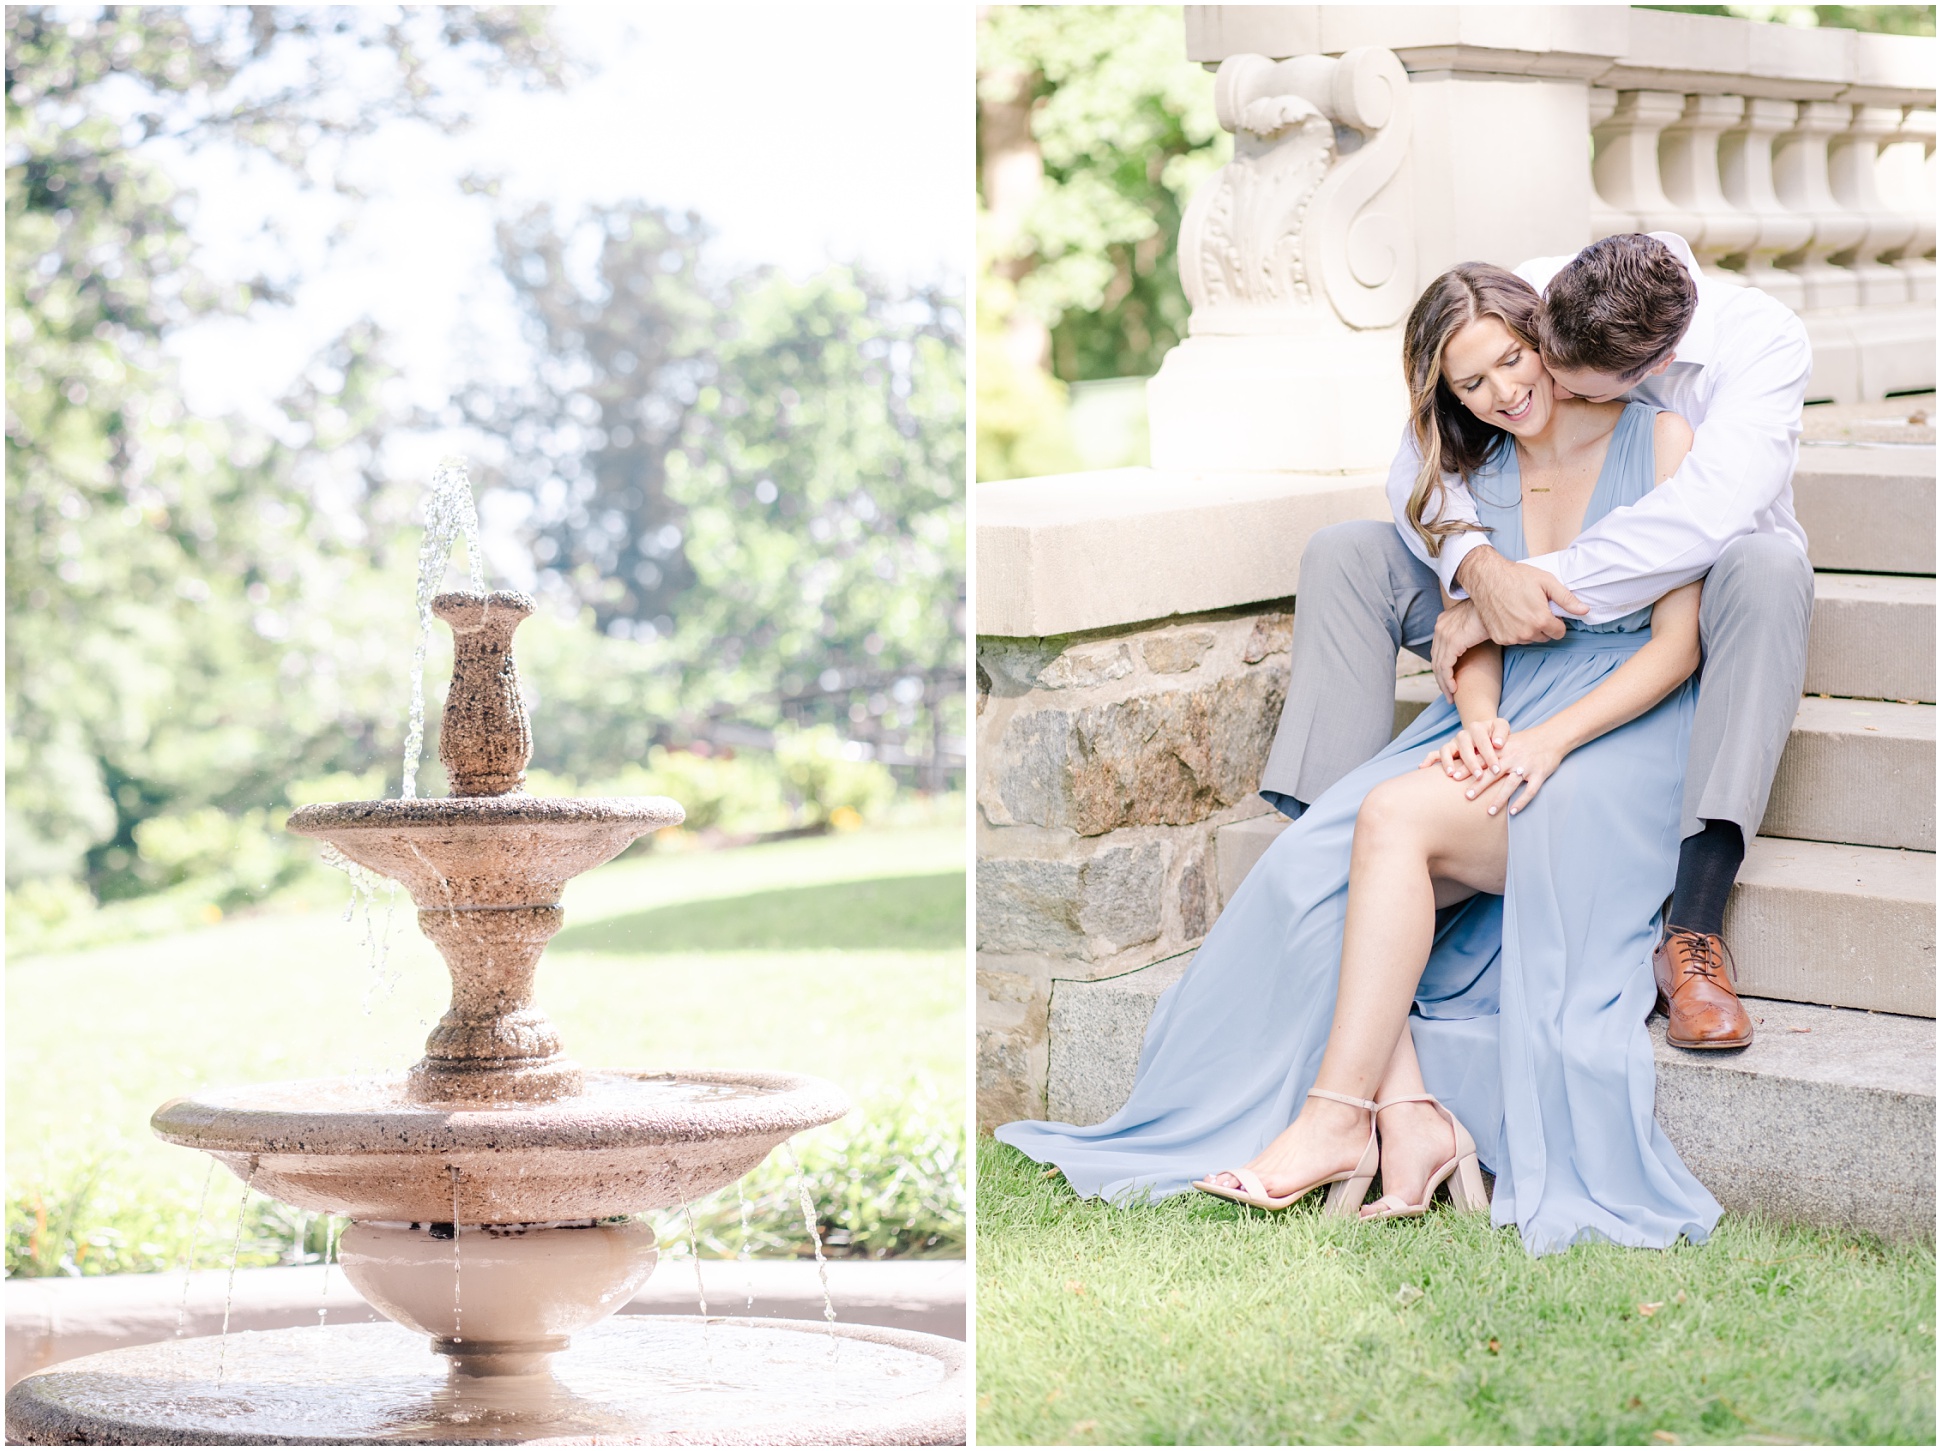 Left: The fountain at the Liriodendron Mansion, Right Image: Angela and Jeff on the steps